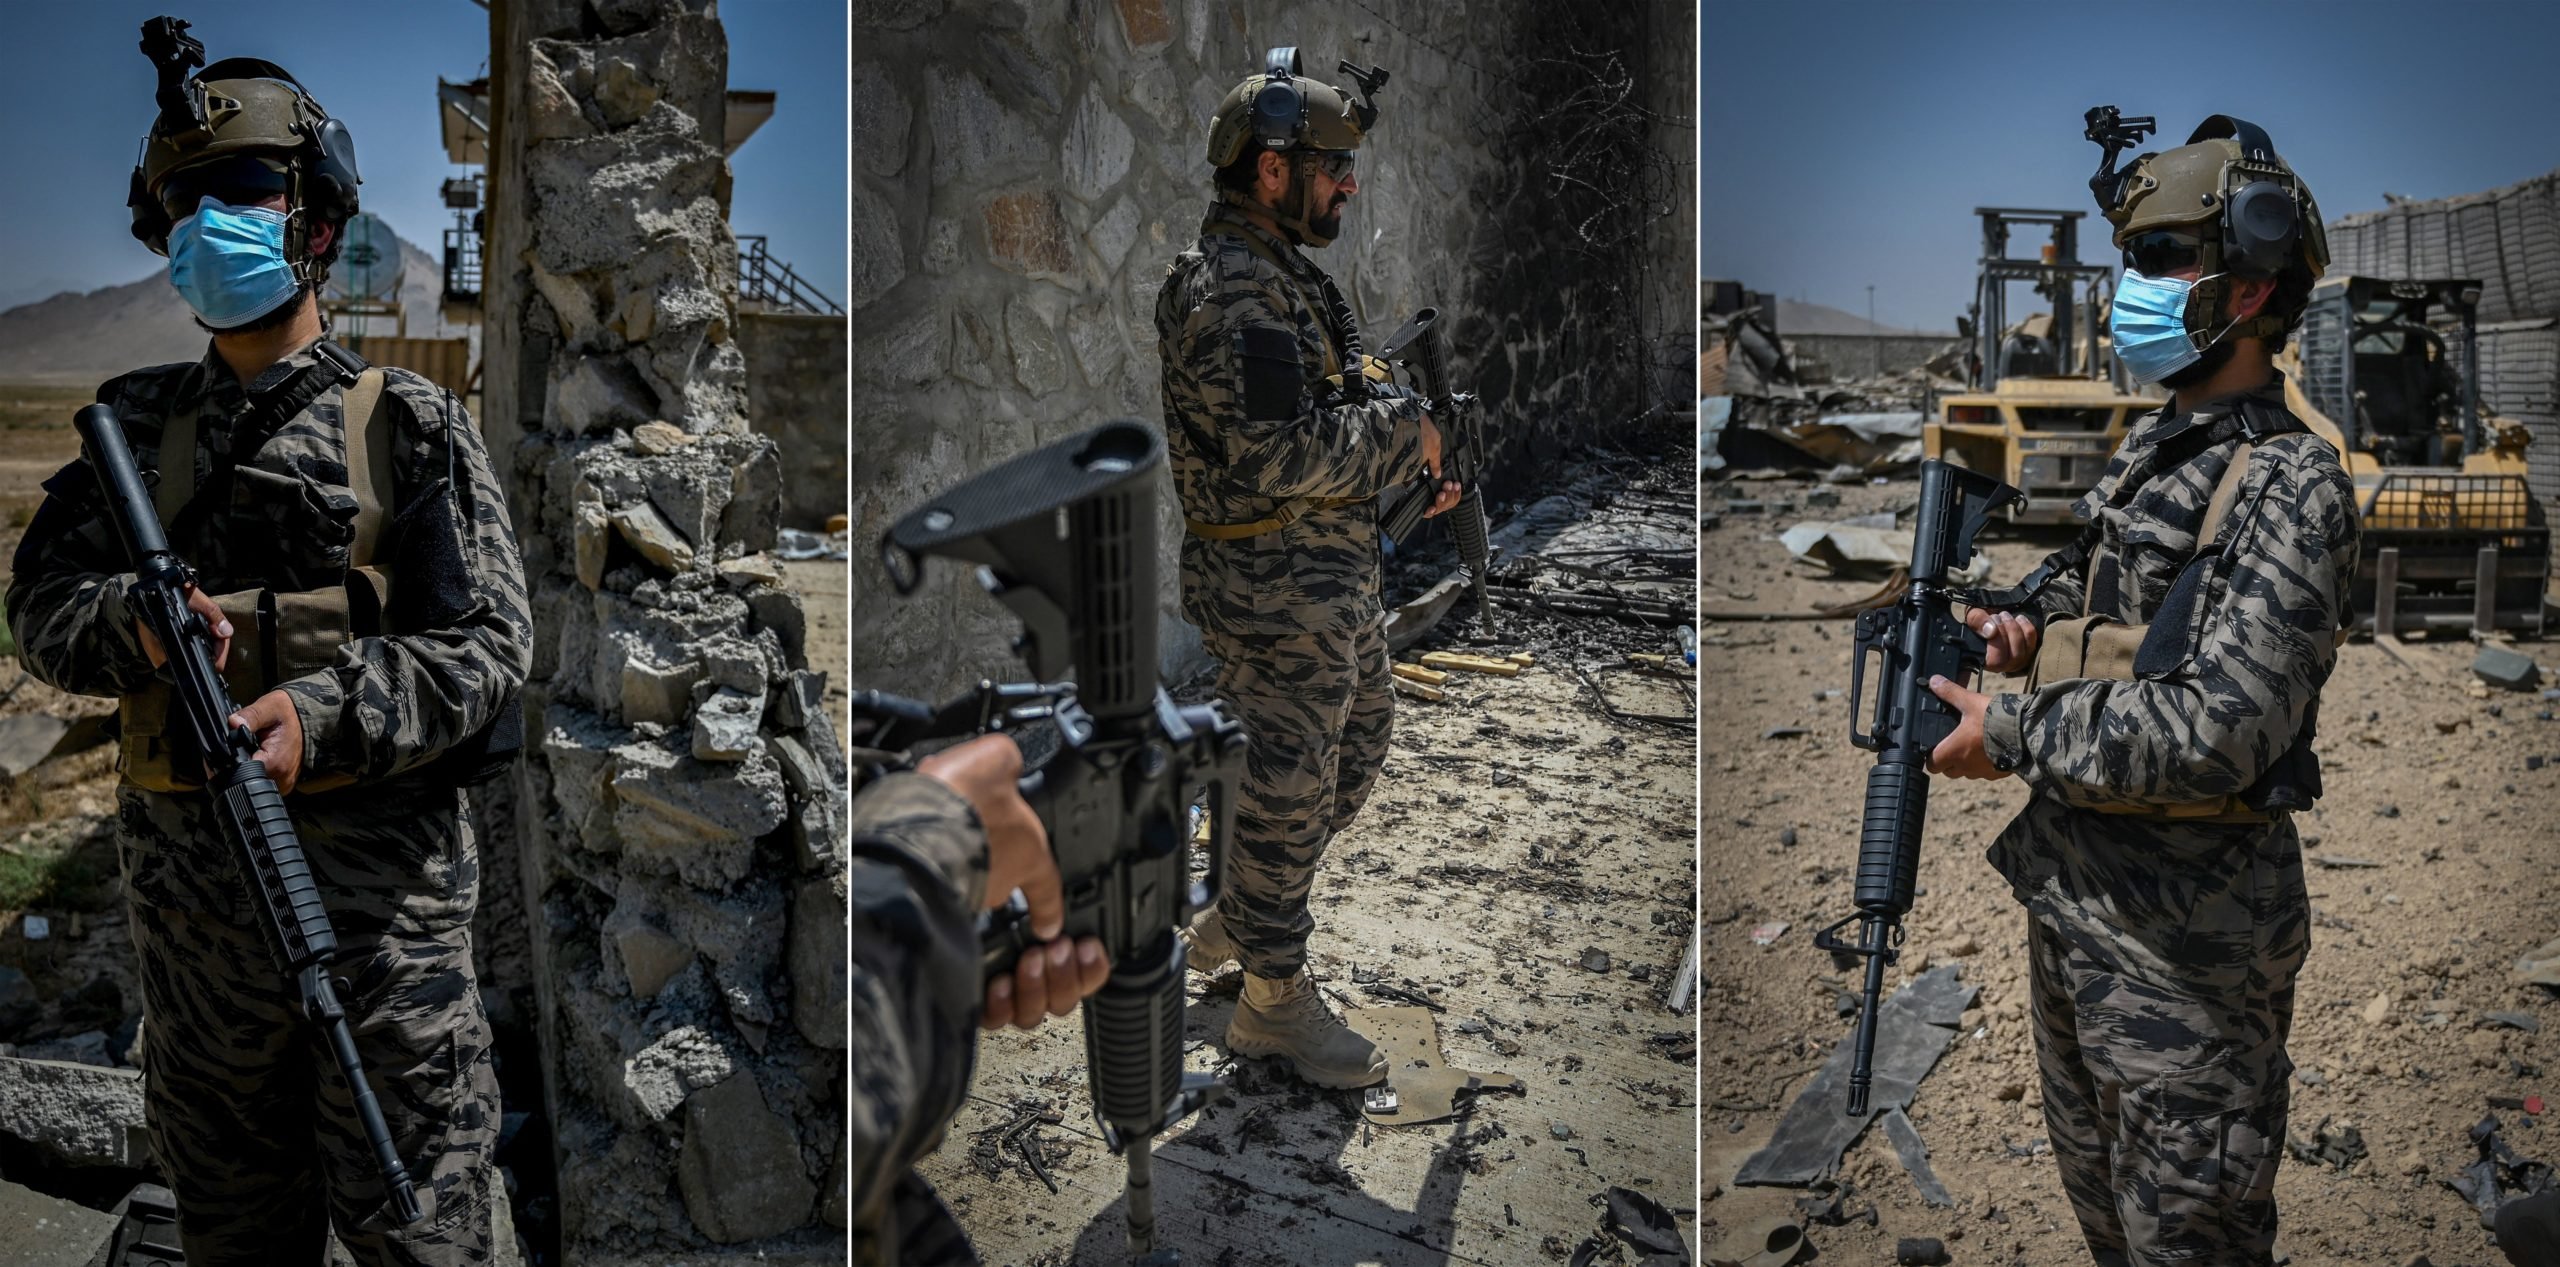 A compilation of photos shows members of the Taliban Badri 313 military unit wearing U.S. gear standing guard outside the debris of the destroyed Central Intelligence Agency base in Kabul, Afghanistan. (Aamir Qureshi/AFP via Getty Images)